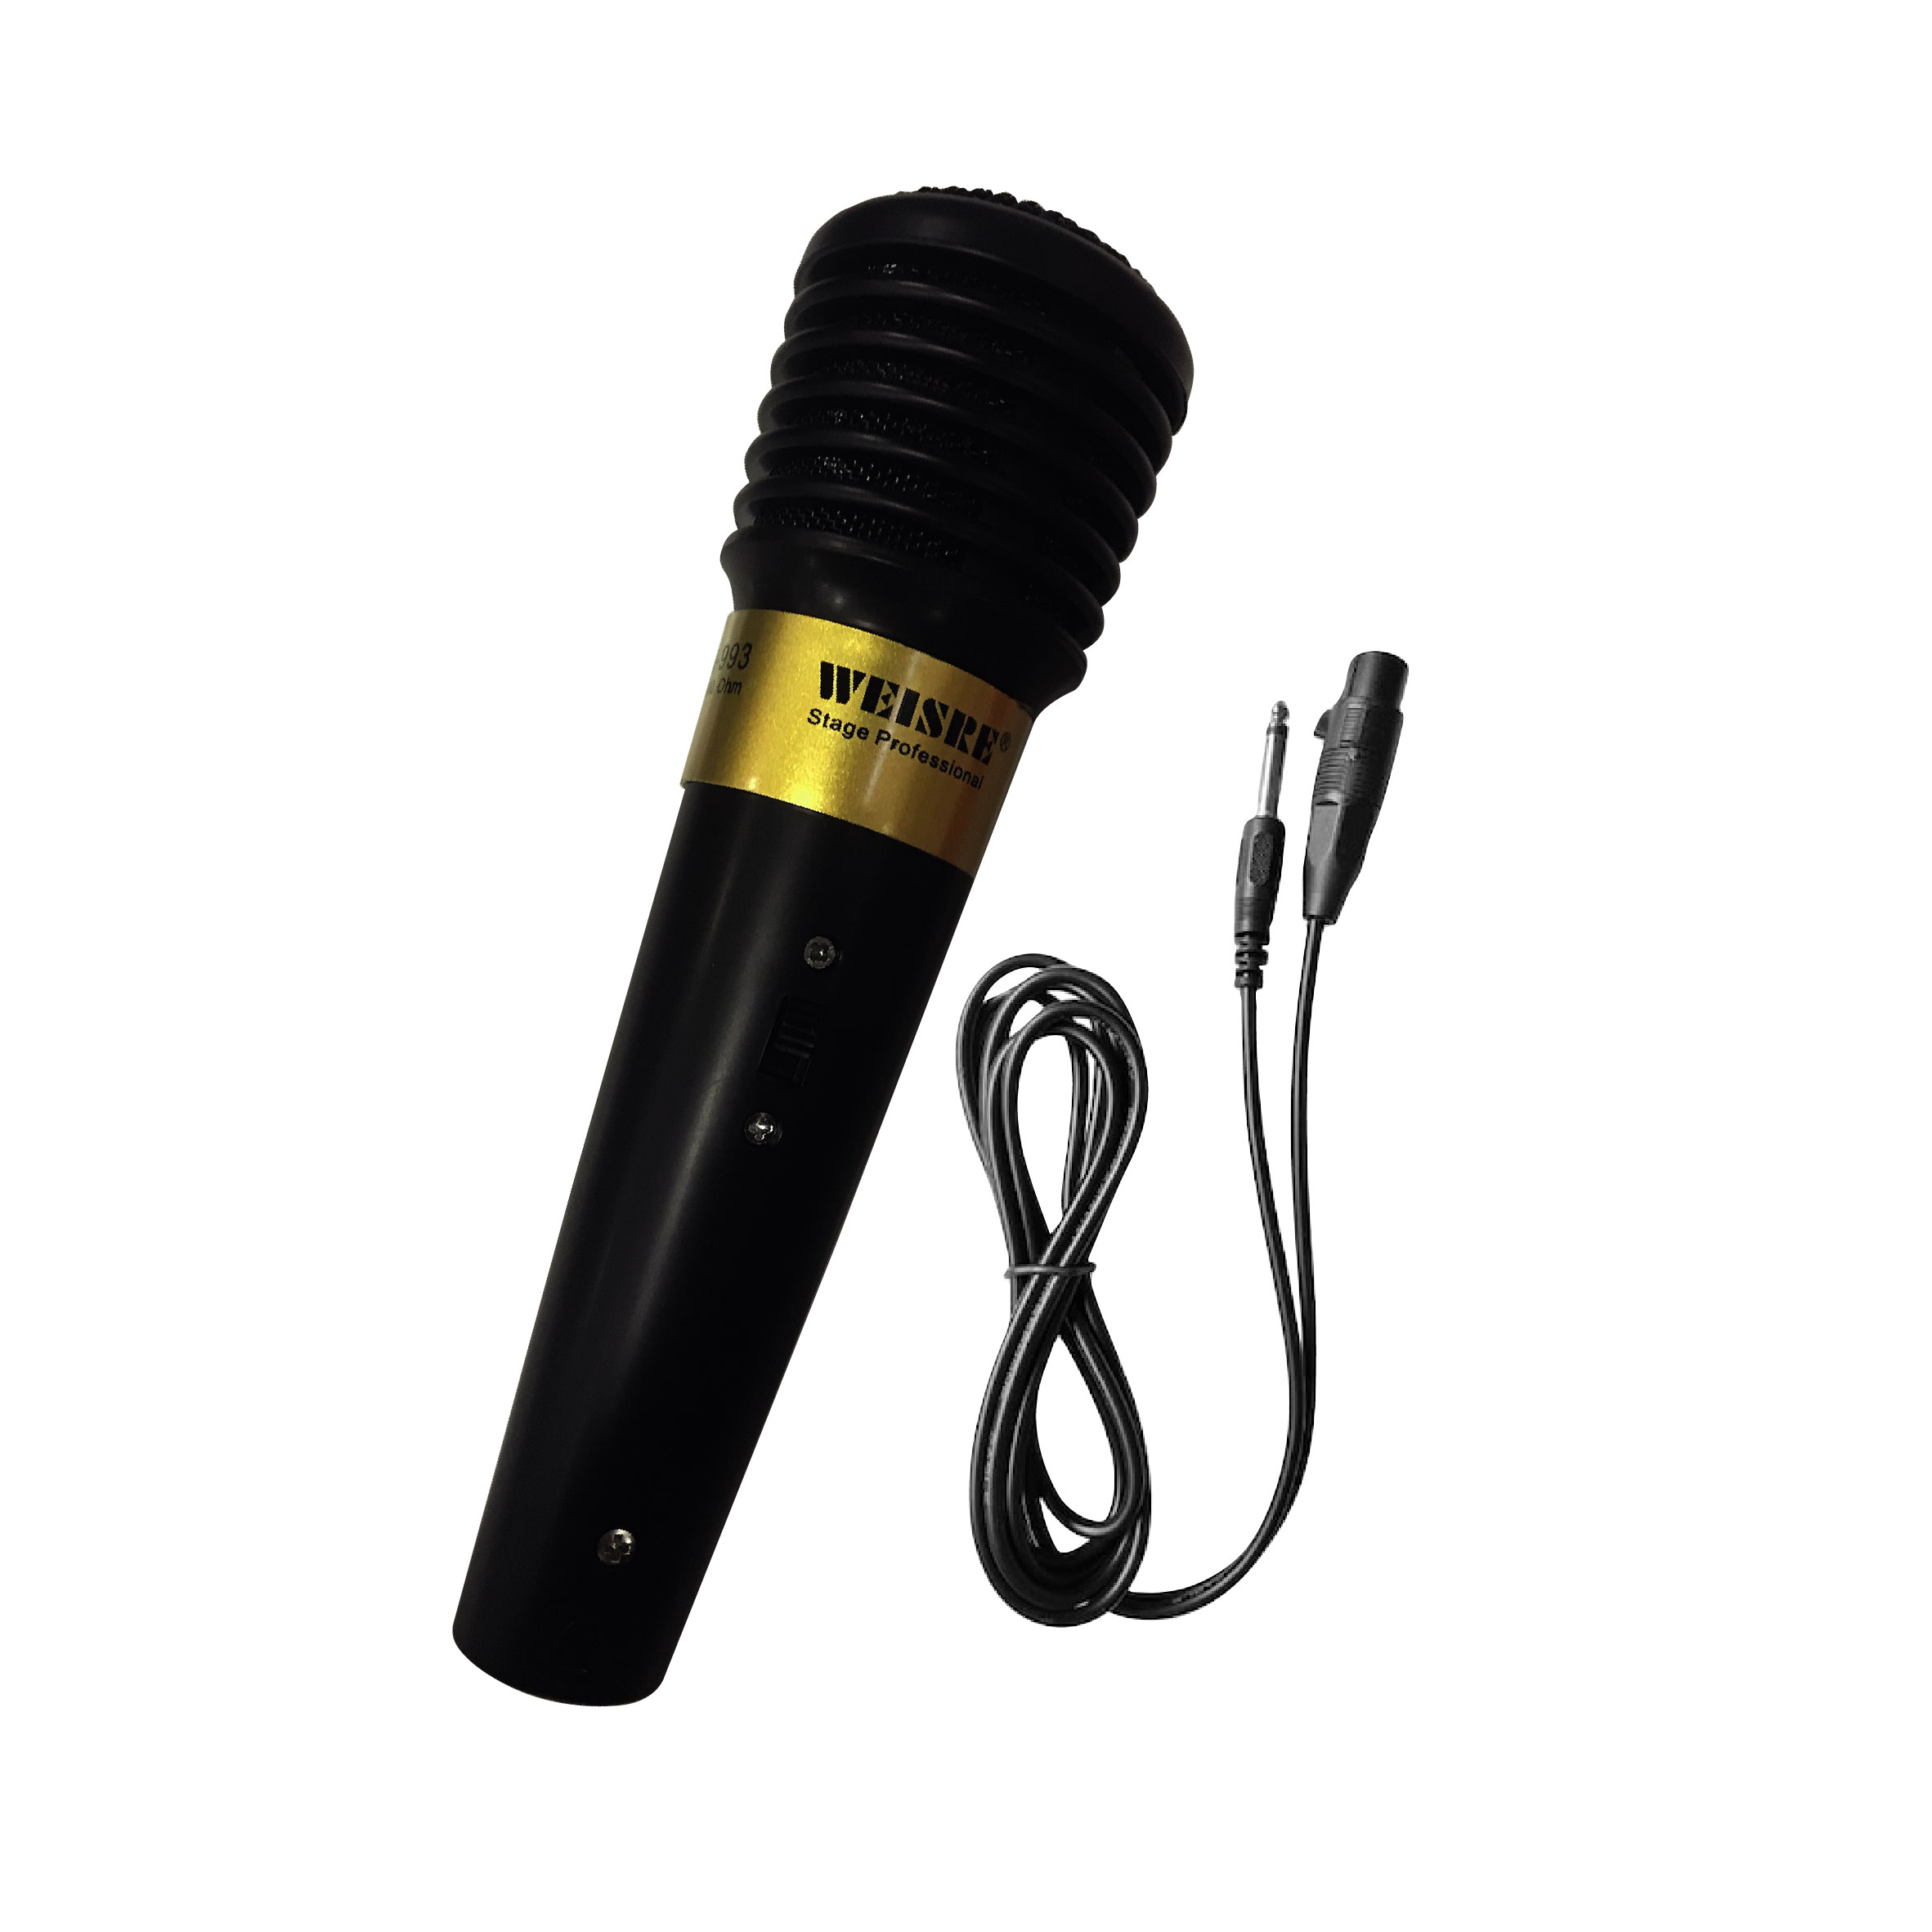 Weisre Dm Series Professional Dynamic Microphone With Wired Black, DM-993